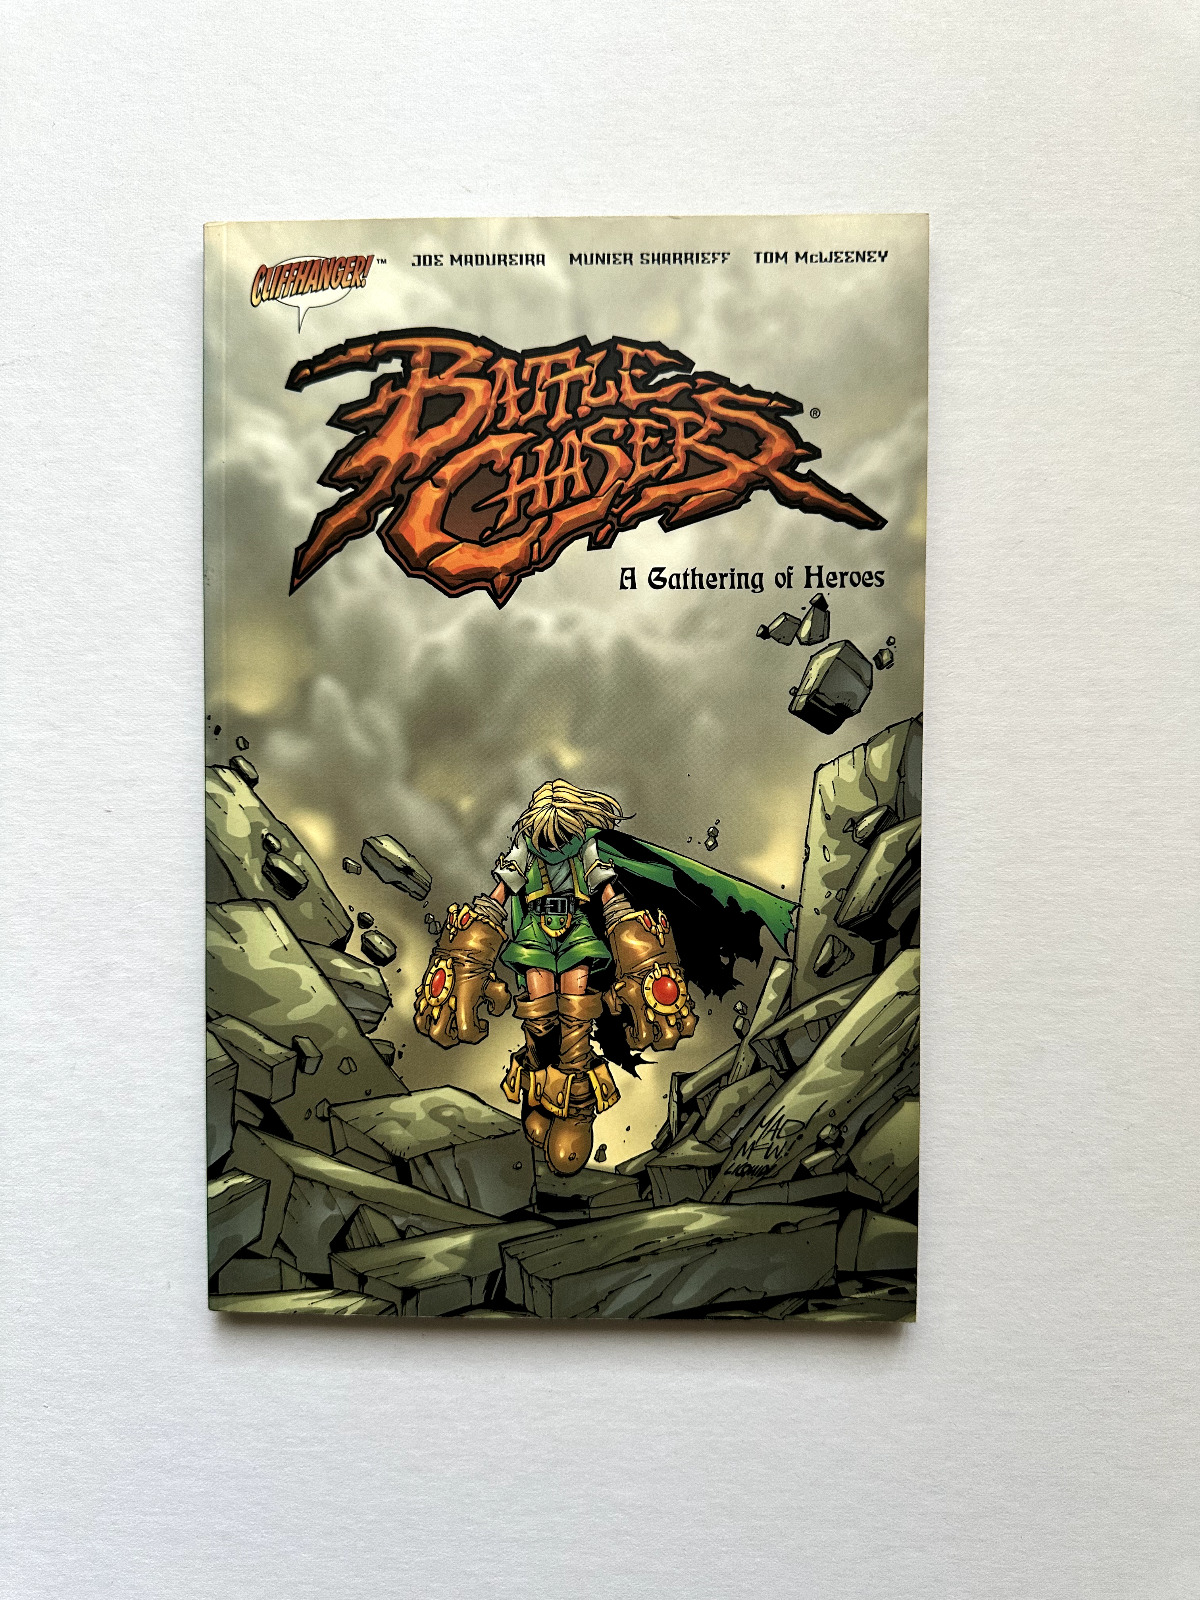 Battle Chasers: A Gathering of Heroes (DC Comics, December 1999)